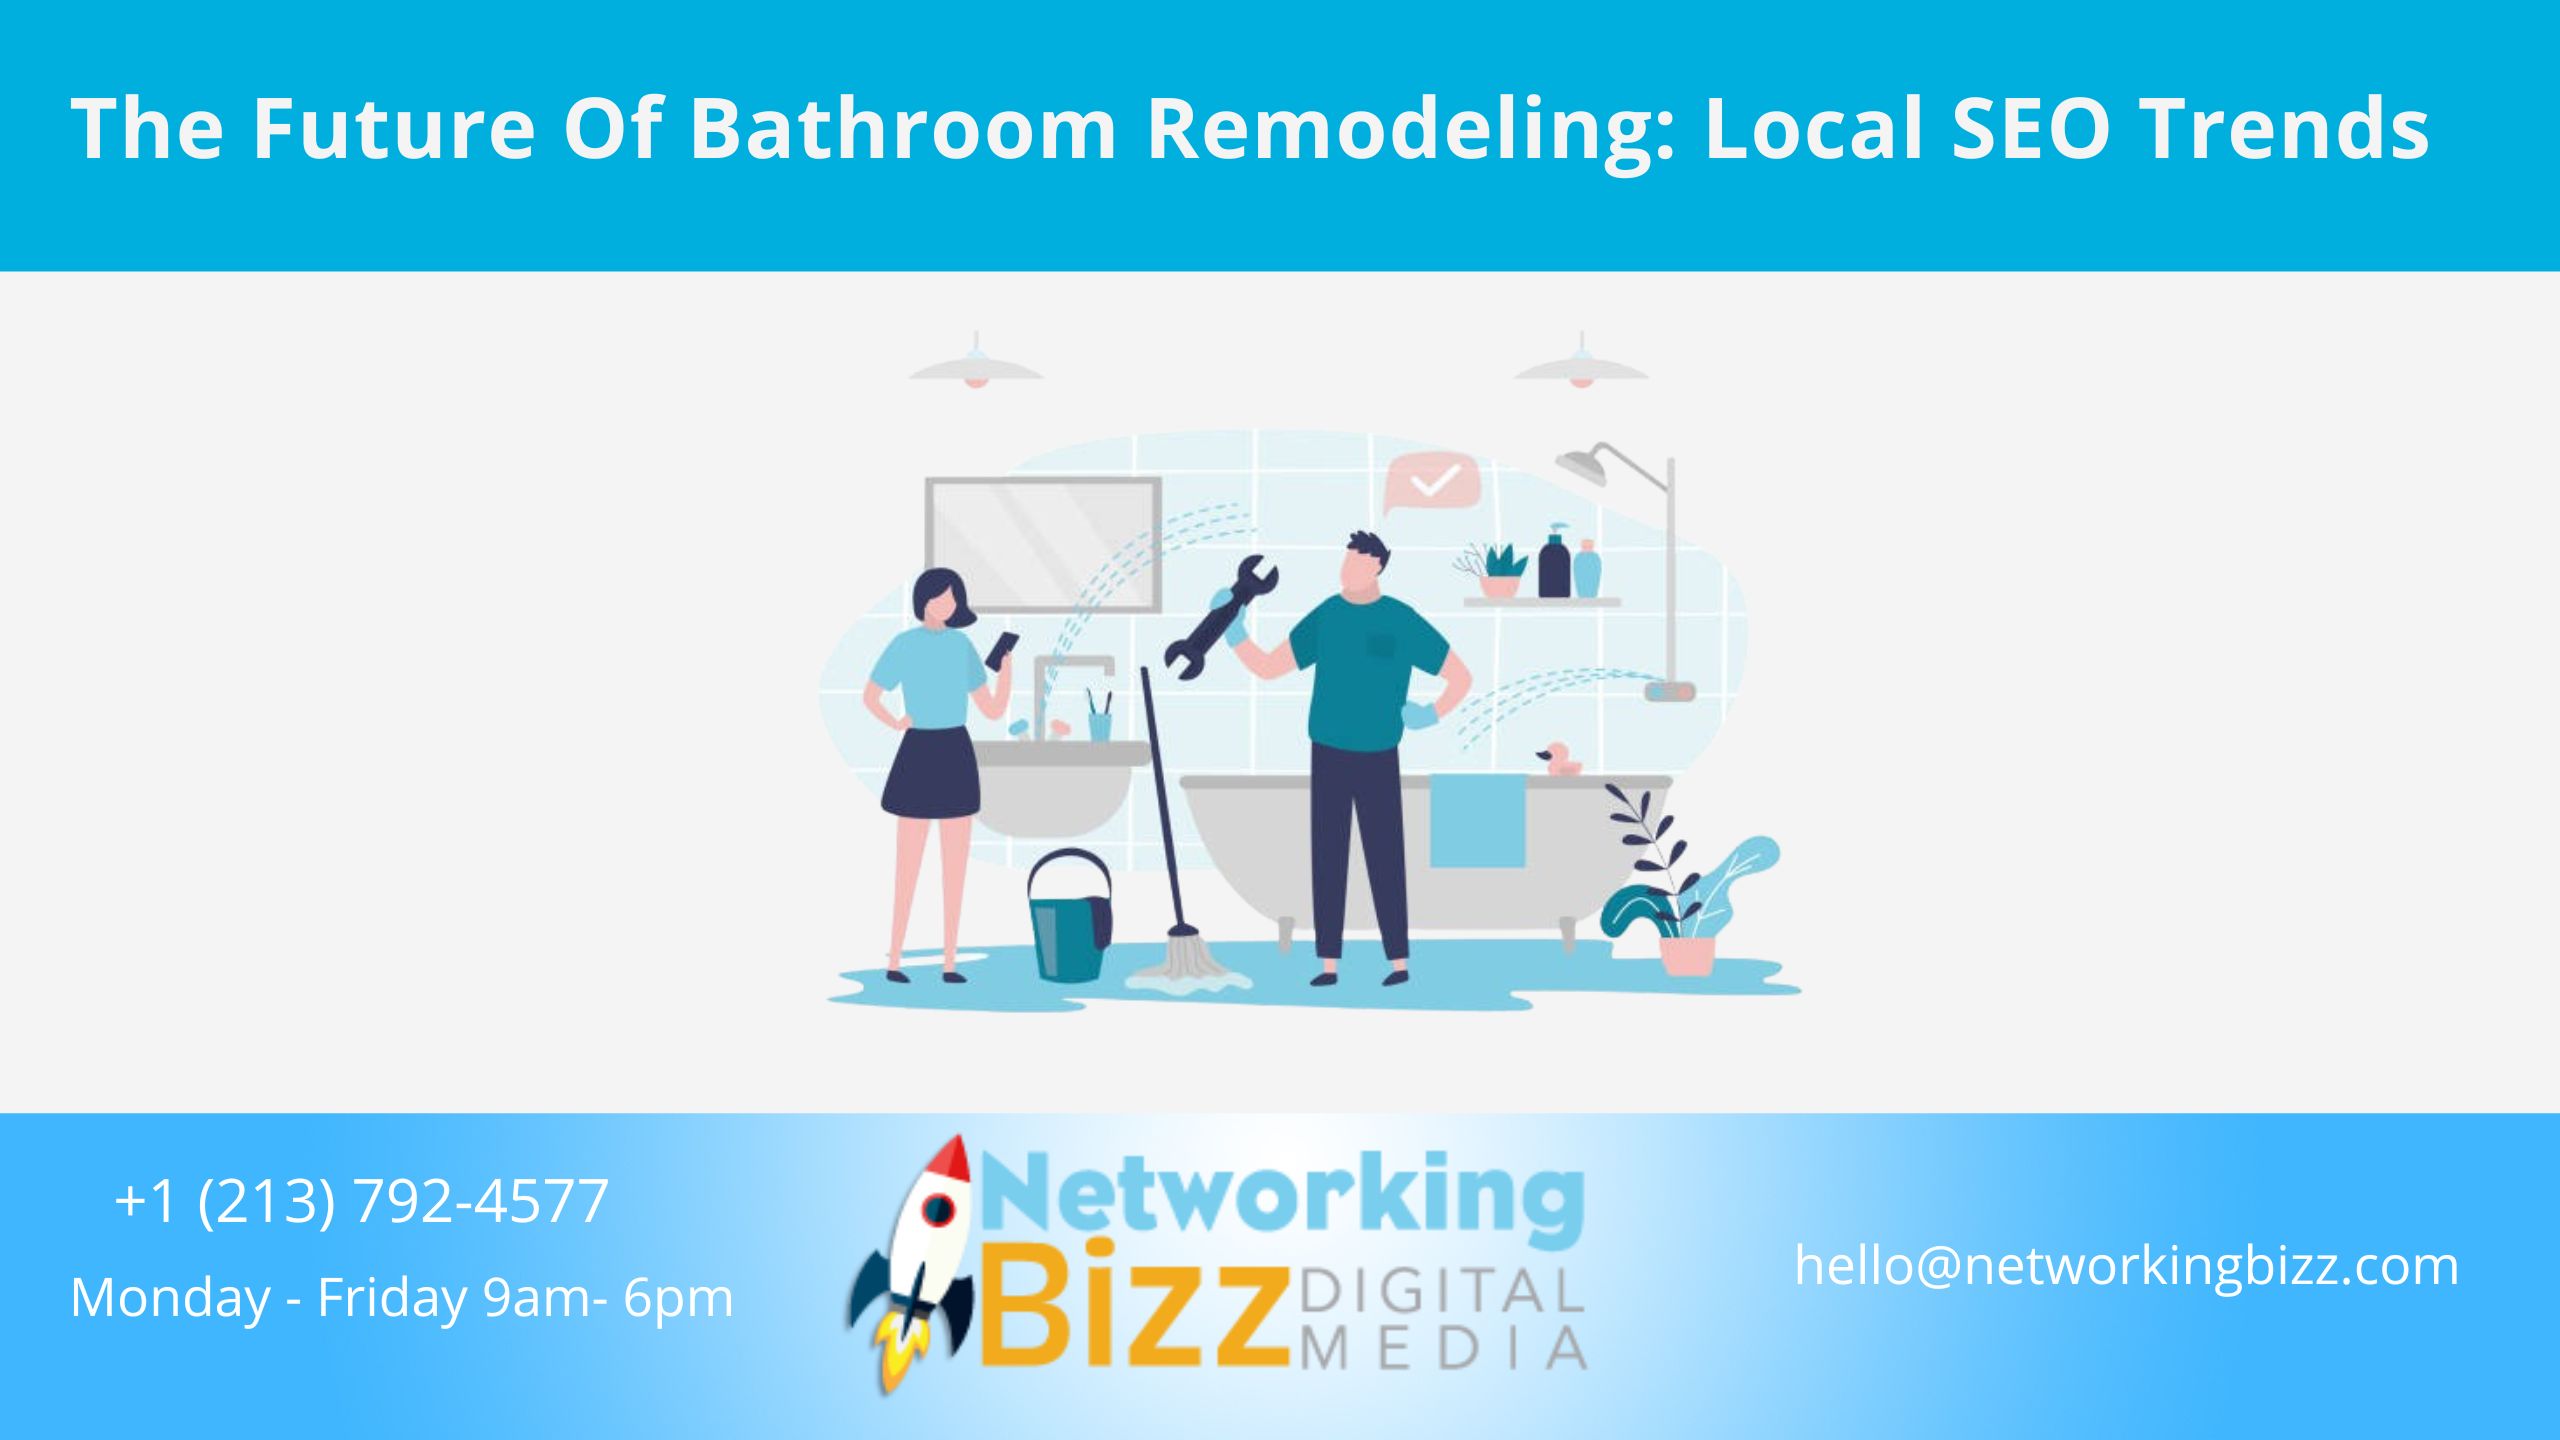 The Future Of Bathroom Remodeling: Local SEO Trends